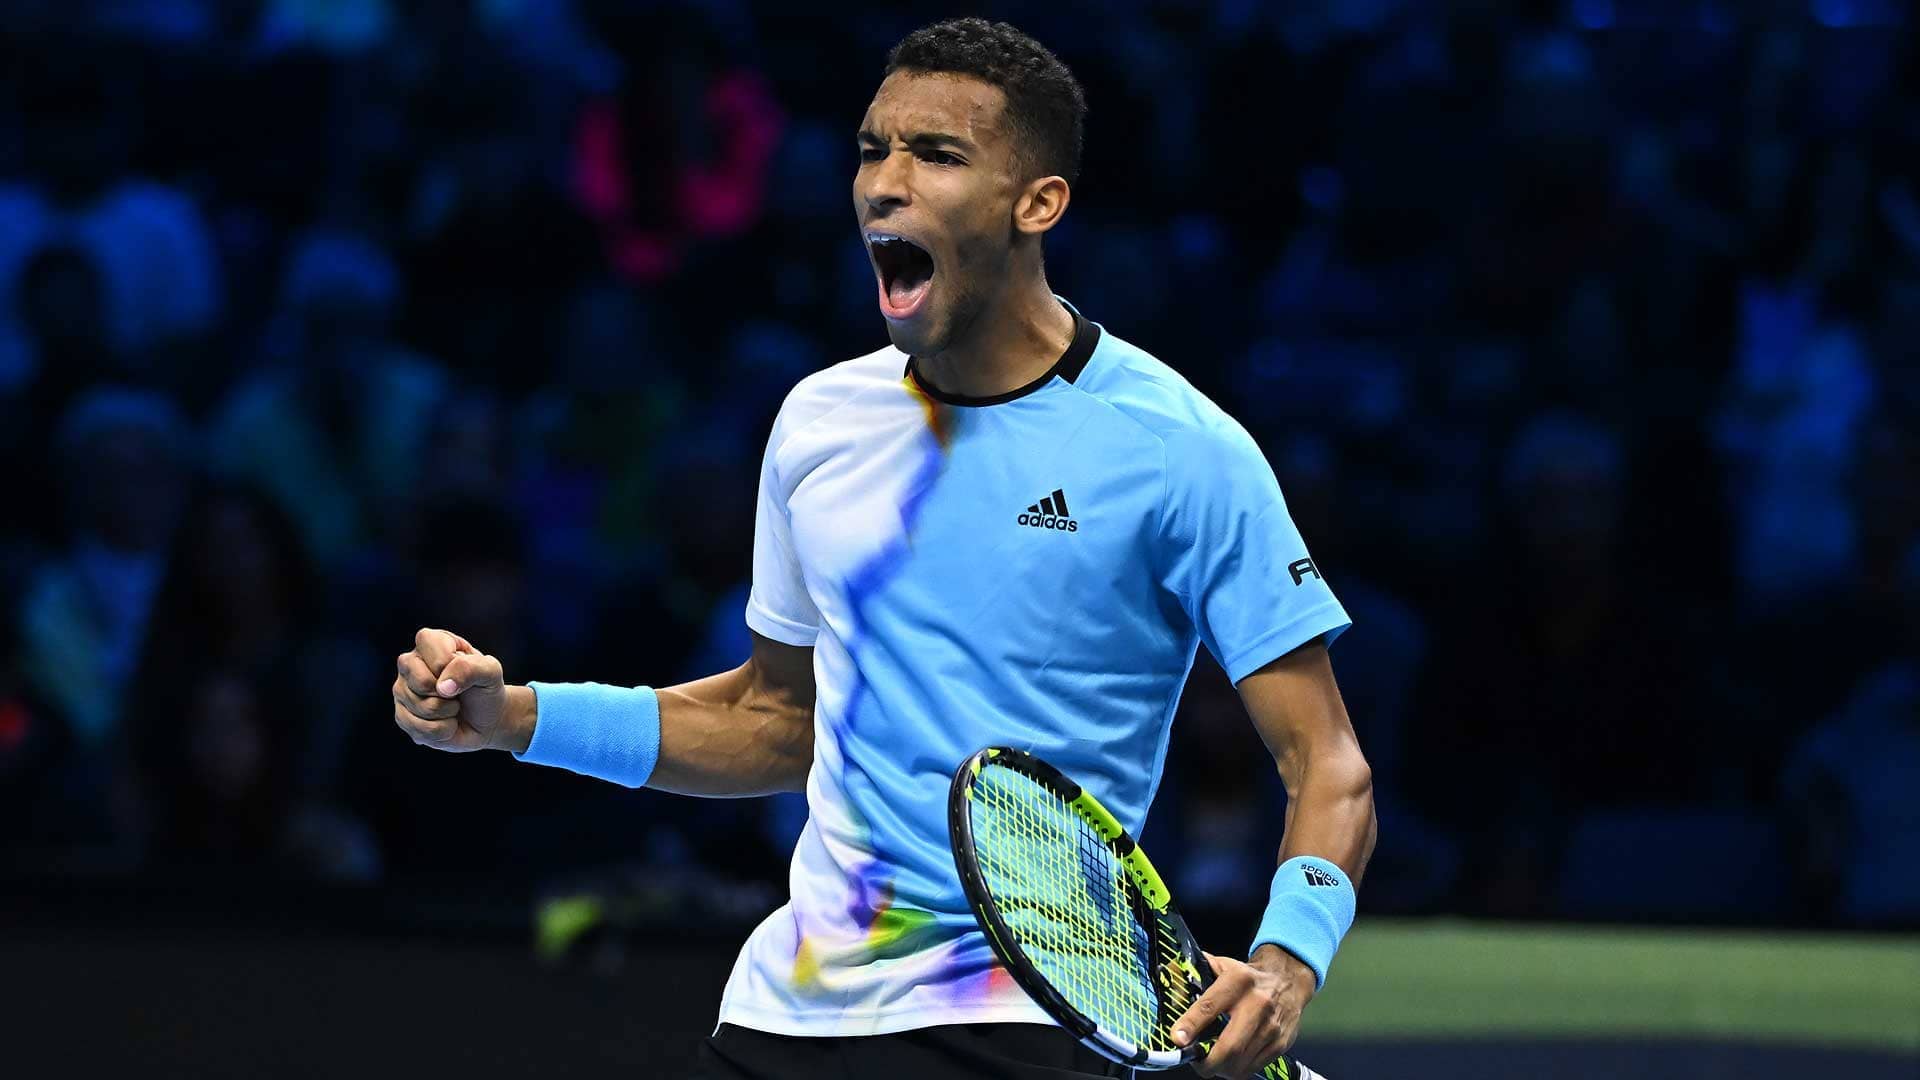 Felix Auger-Aliassime defeats Rafael Nadal on Sunday at the Nitto ATP Finals in Turin.